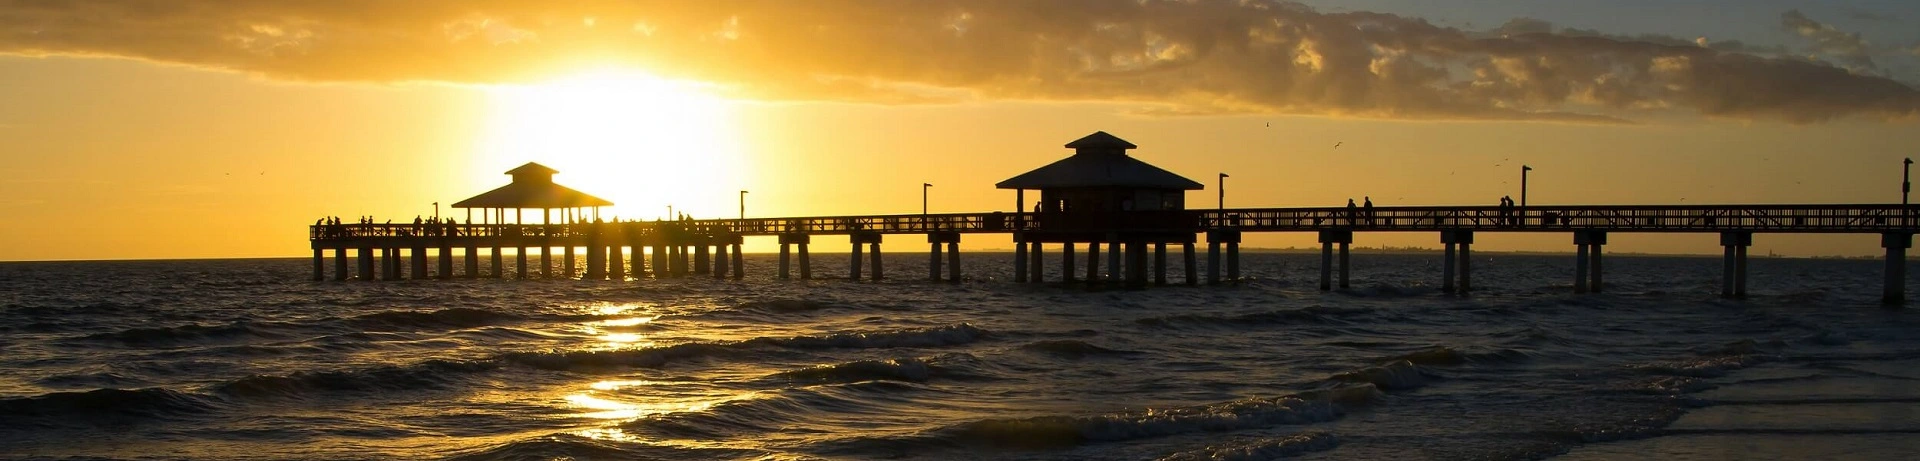 sunset behind public pier in lee county